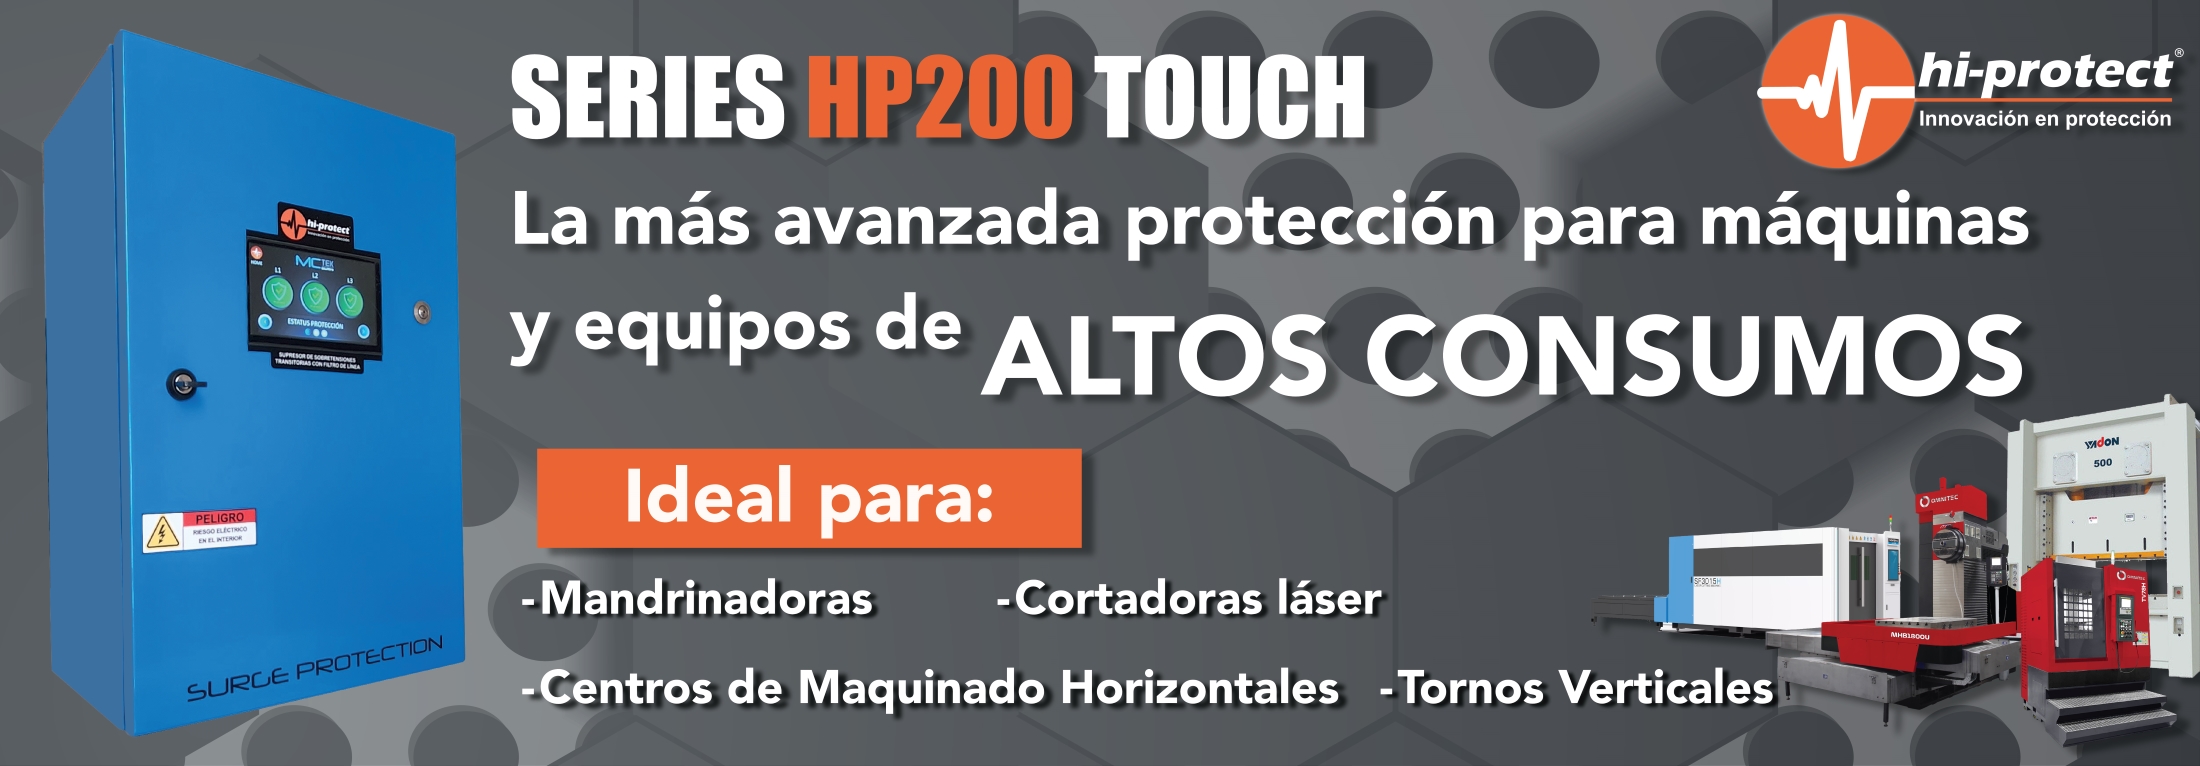 HP200 TOUCH OK 2200PX